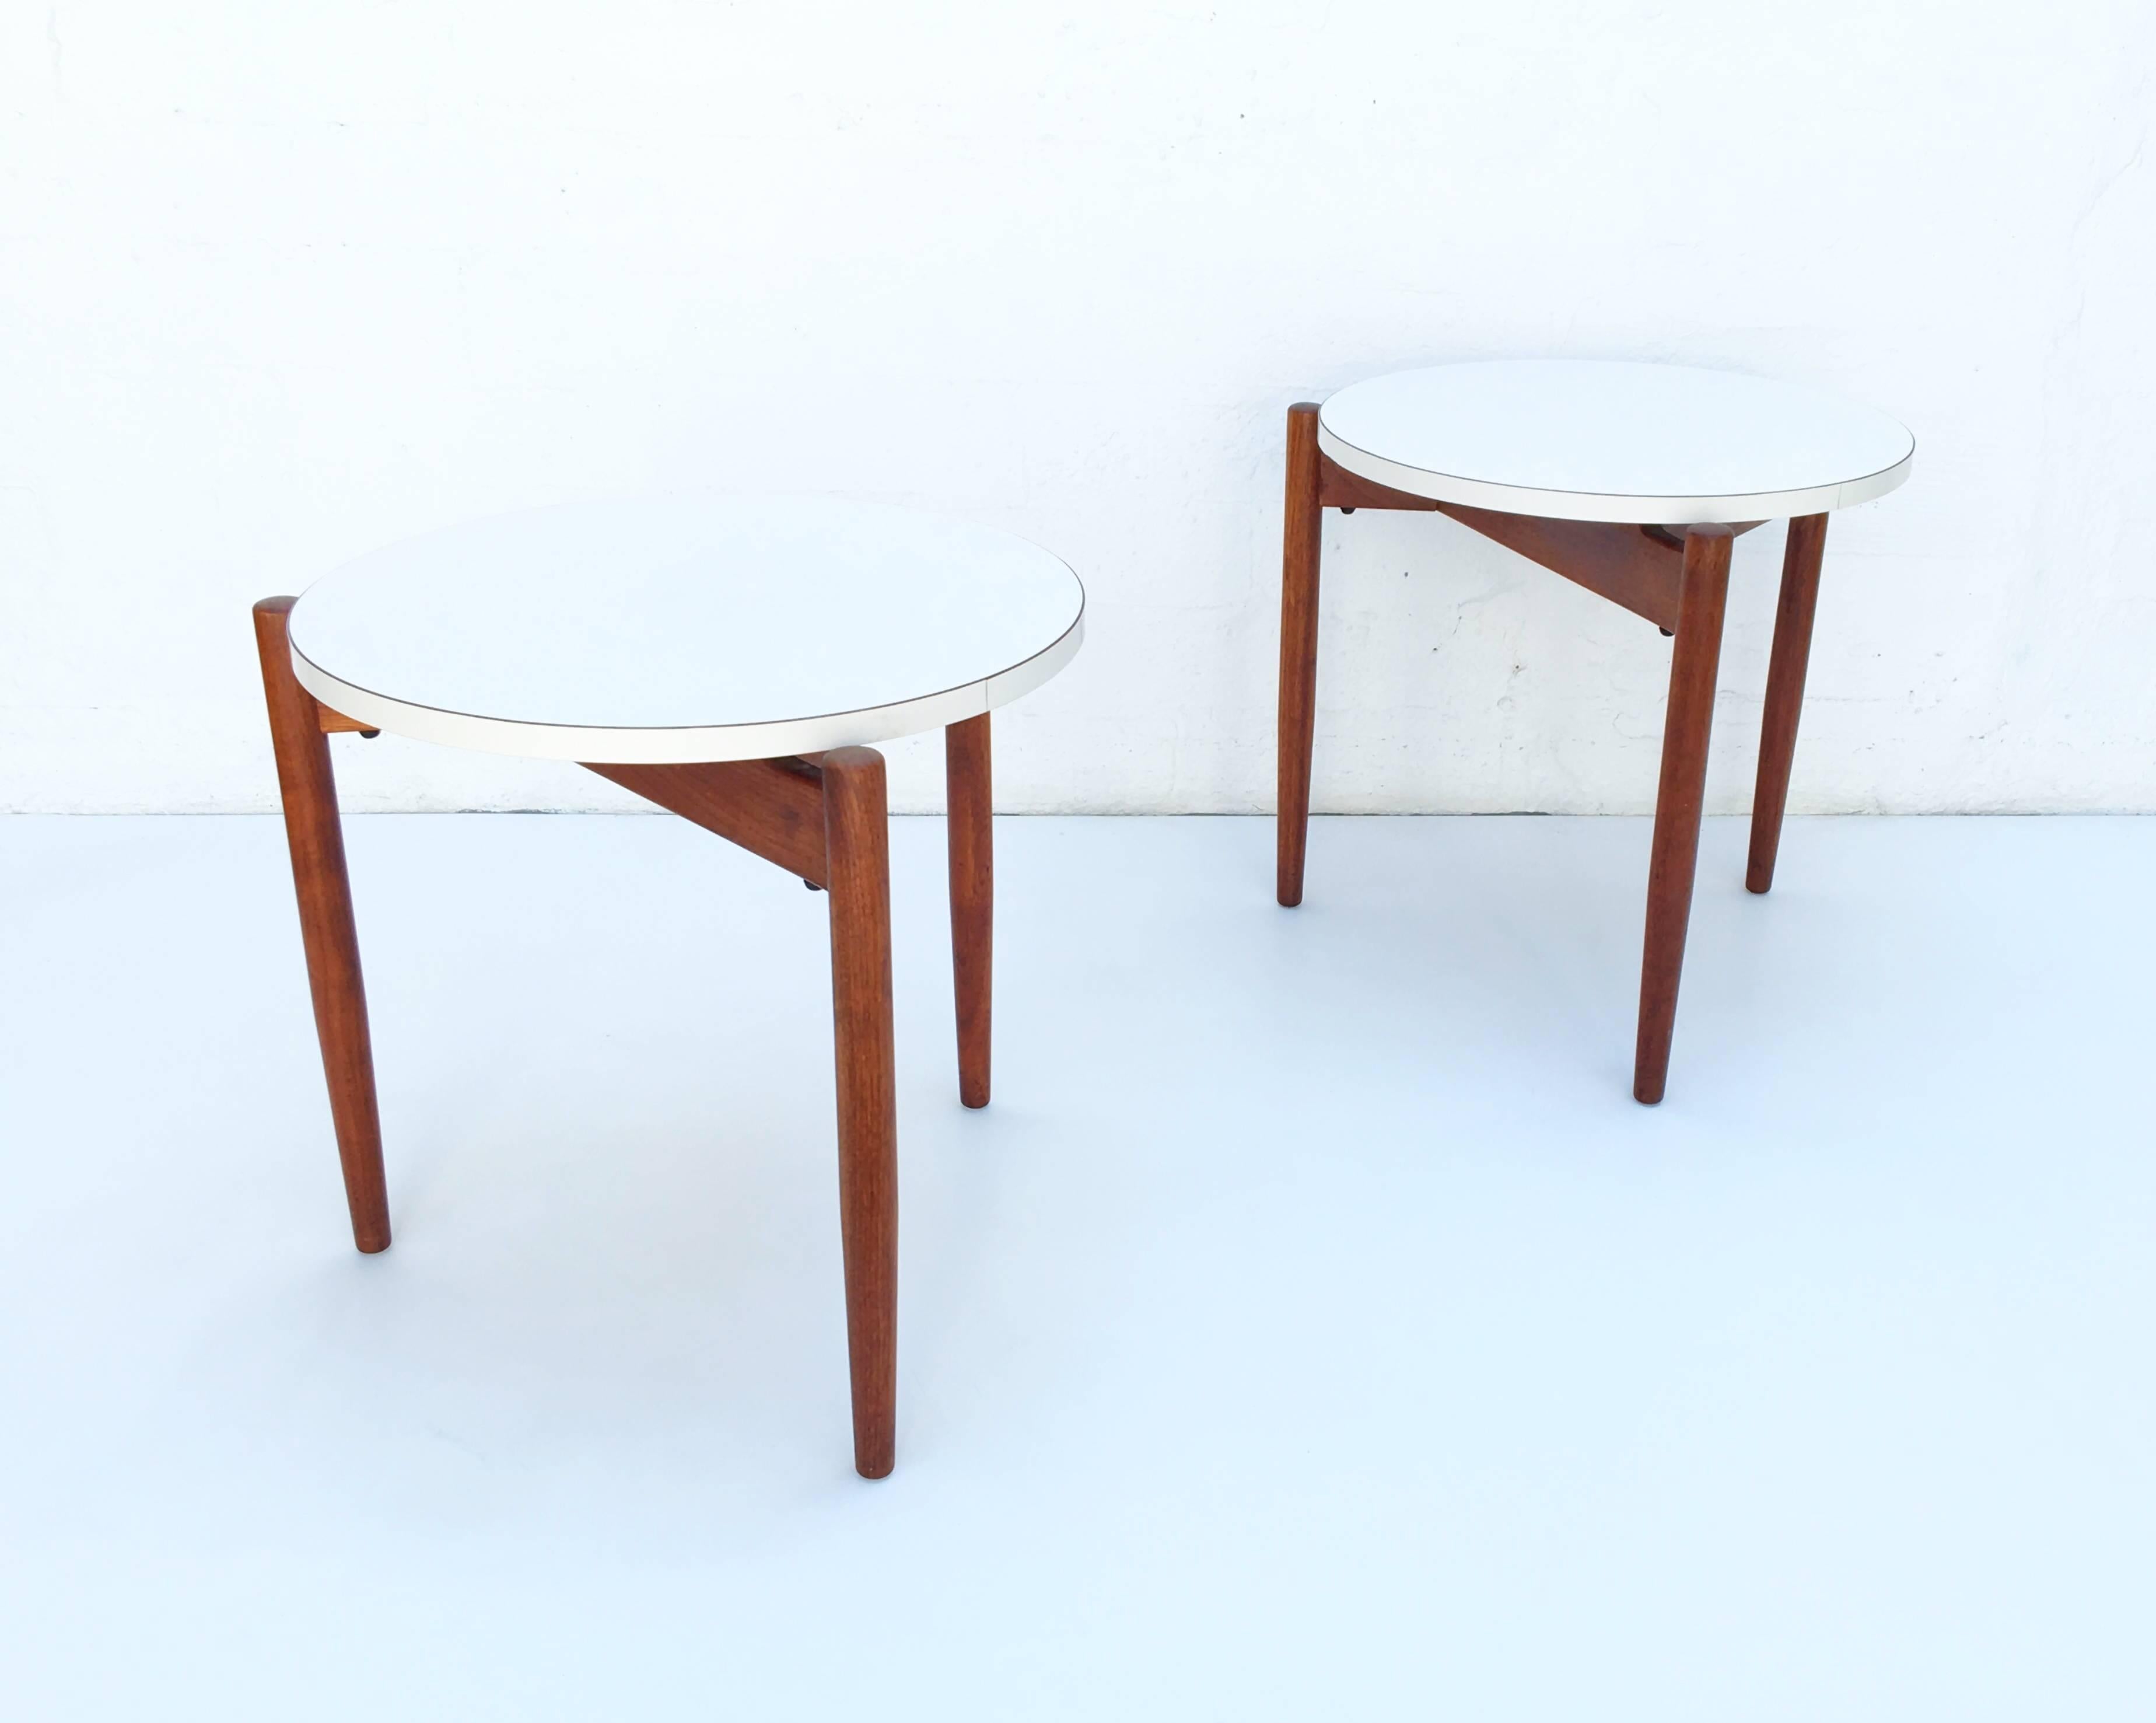 Rare pair of tripod dark walnut with white Formica tops staking side tables design by Jens Risom in the 1960s.

